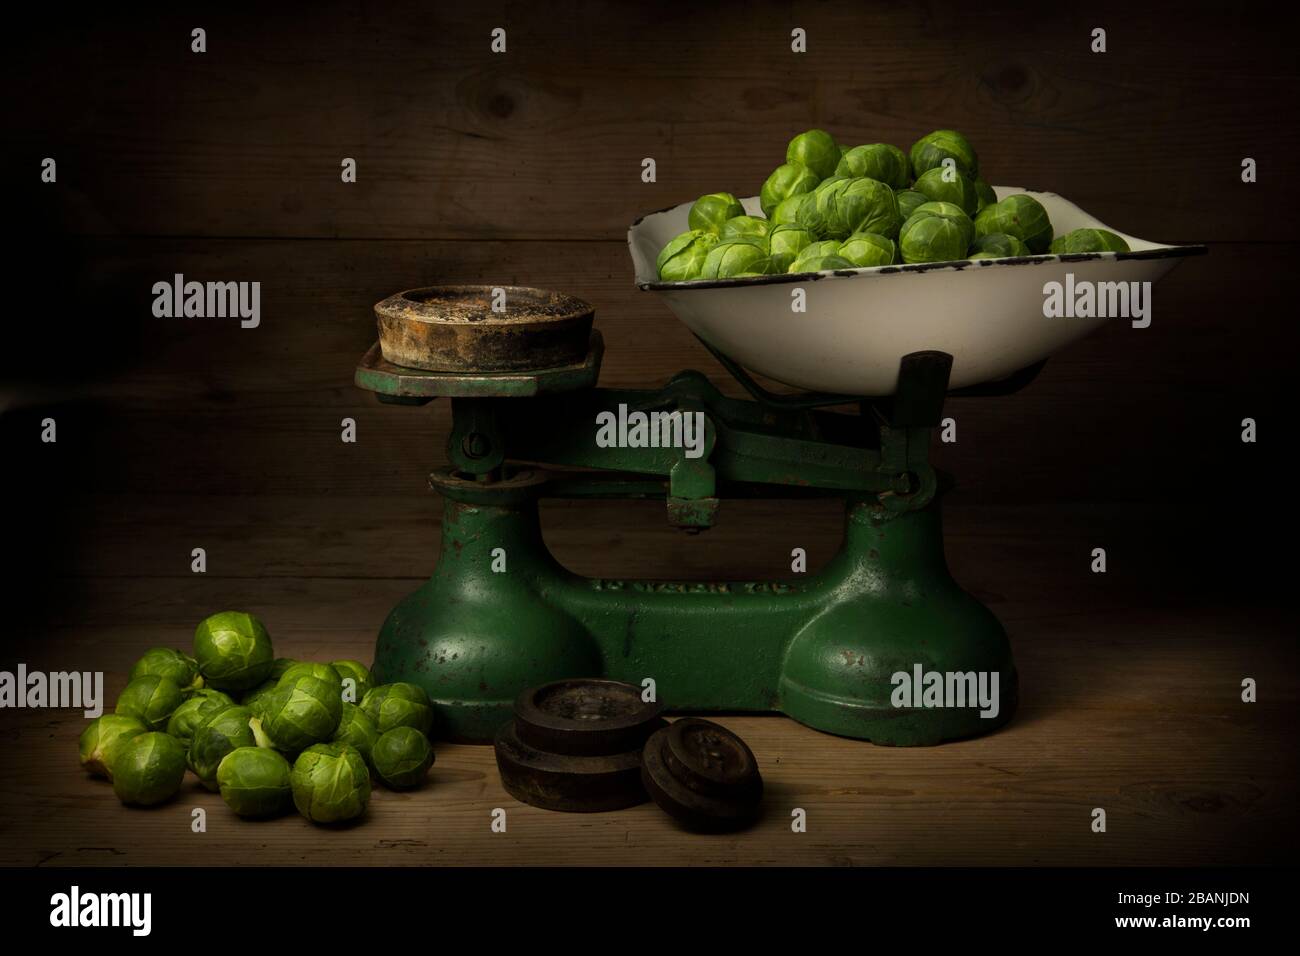 Brussel sprouts on a traditional balance weighing scales. Stock Photo